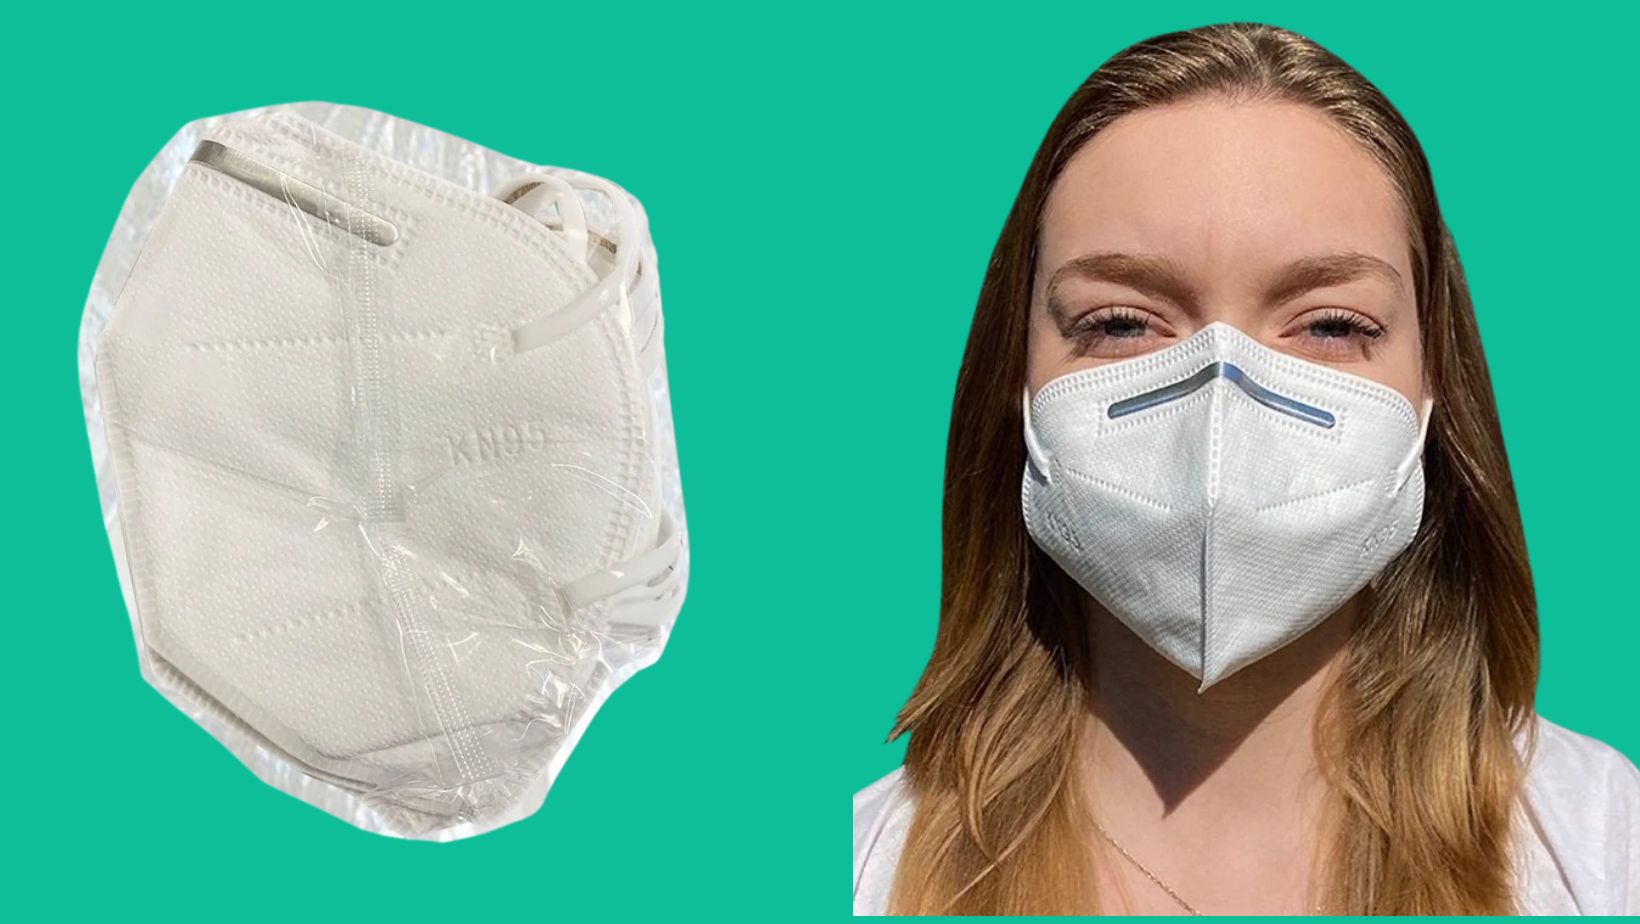 <strong><a href="https://go.skimresources.com/?id=38395X987171&xs=1&xcust=KN95masks-KristenAdaway-010422-&url=https%3A%2F%2Fdmbsupply.com%2Fcollections%2Fkn95-masks%2Fproducts%2Fcopy-of-disposable-3-ply-face-mask-50-masks" target="_blank" role="link" rel="sponsored" class=" js-entry-link cet-external-link" data-vars-item-name="KN95 protective face mask " data-vars-item-type="text" data-vars-unit-name="61d4812ae4b061afe3ab8dea" data-vars-unit-type="buzz_body" data-vars-target-content-id="https://go.skimresources.com/?id=38395X987171&xs=1&xcust=KN95masks-KristenAdaway-010422-&url=https%3A%2F%2Fdmbsupply.com%2Fcollections%2Fkn95-masks%2Fproducts%2Fcopy-of-disposable-3-ply-face-mask-50-masks" data-vars-target-content-type="url" data-vars-type="web_external_link" data-vars-subunit-name="article_body" data-vars-subunit-type="component" data-vars-position-in-subunit="23">KN95 protective face mask </a></strong>